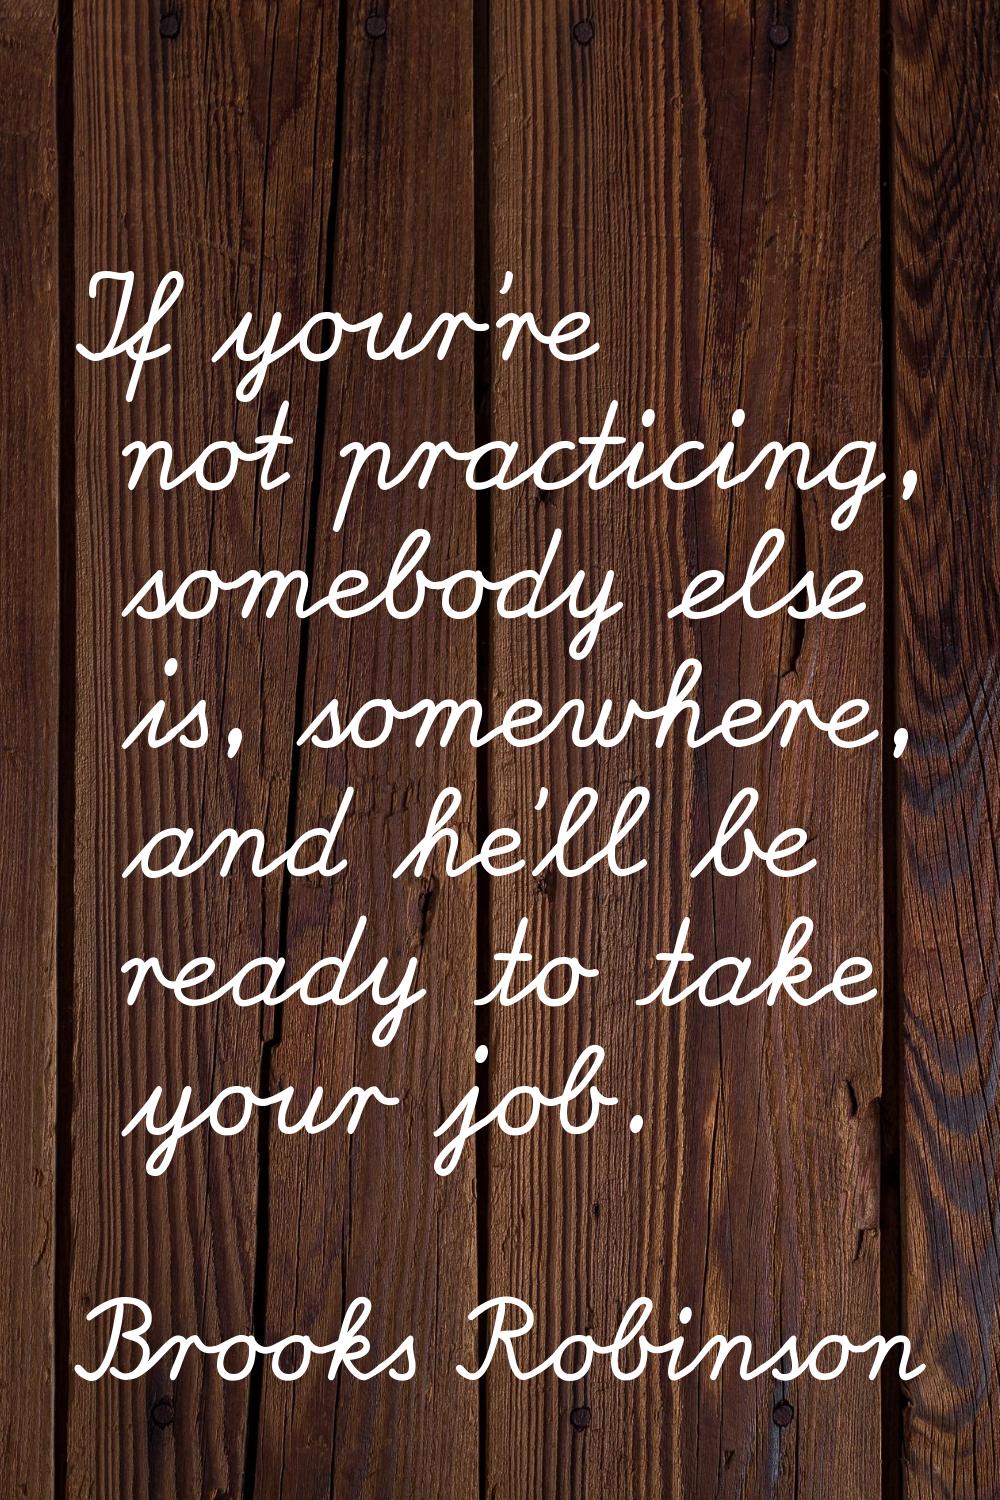 If your're not practicing, somebody else is, somewhere, and he'll be ready to take your job.